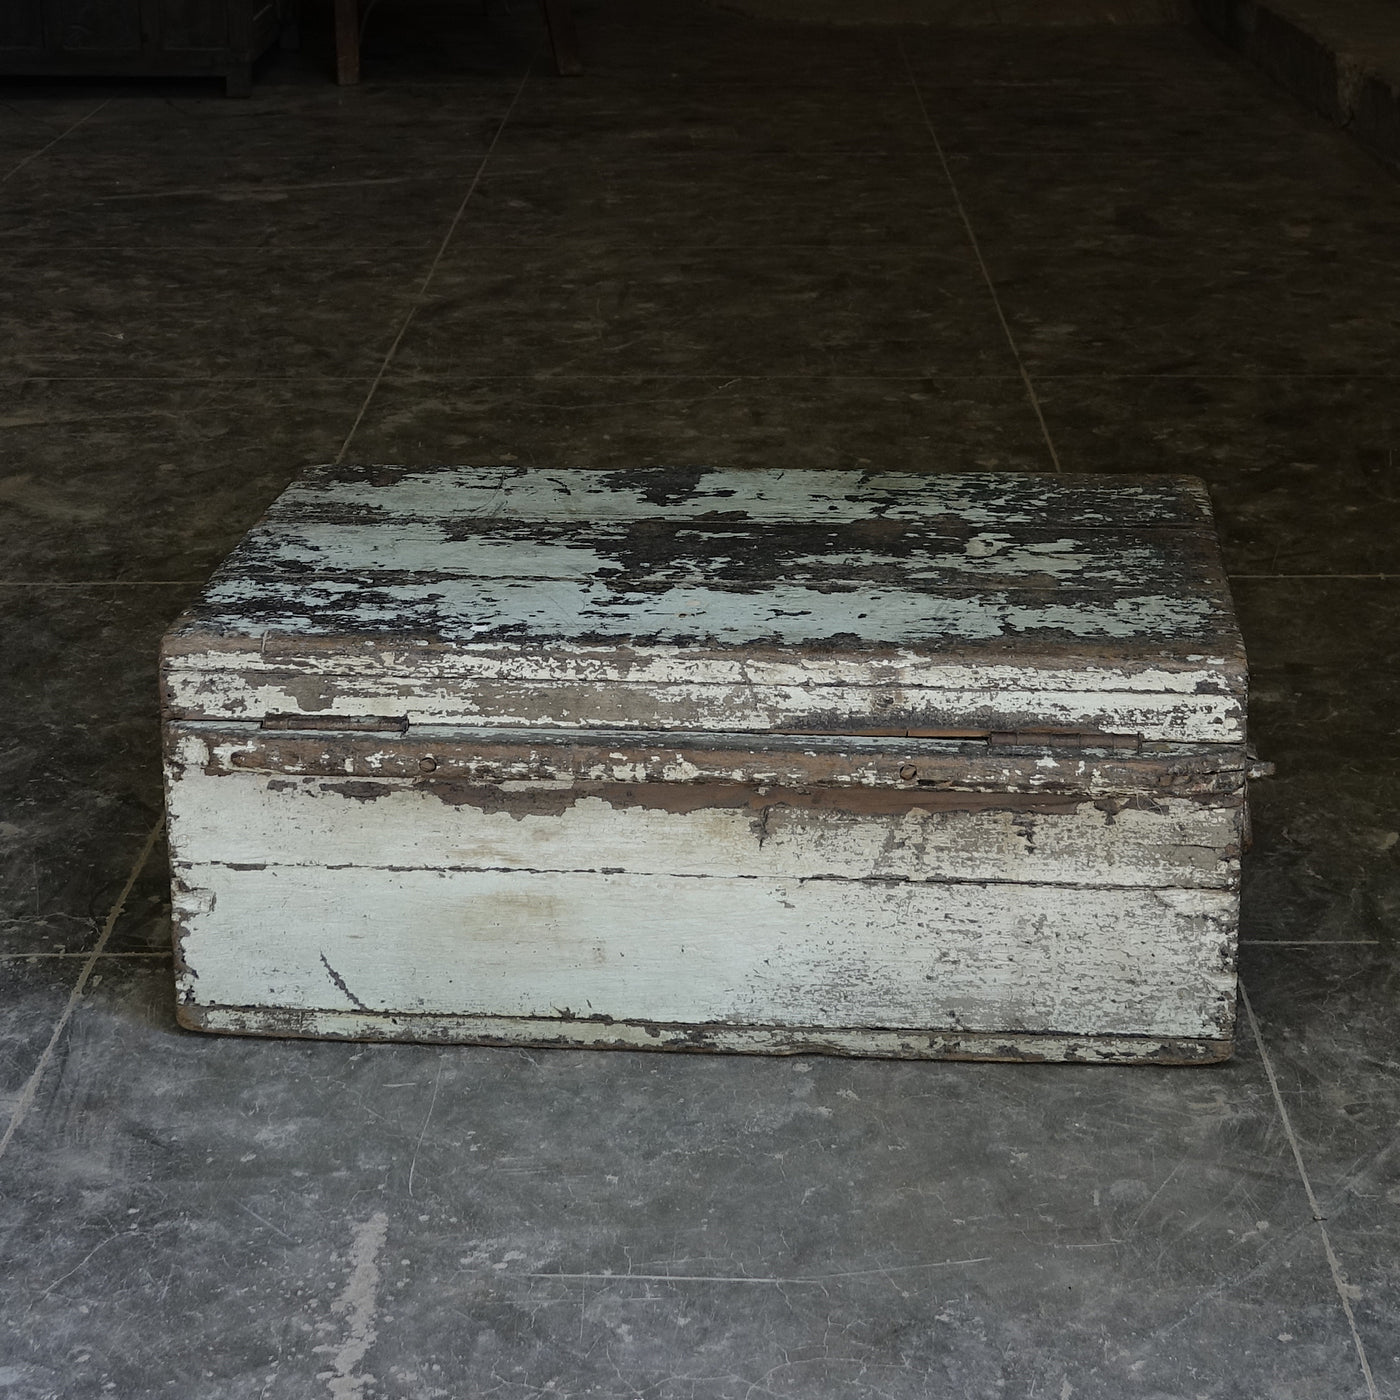 Digha - old wooden chest